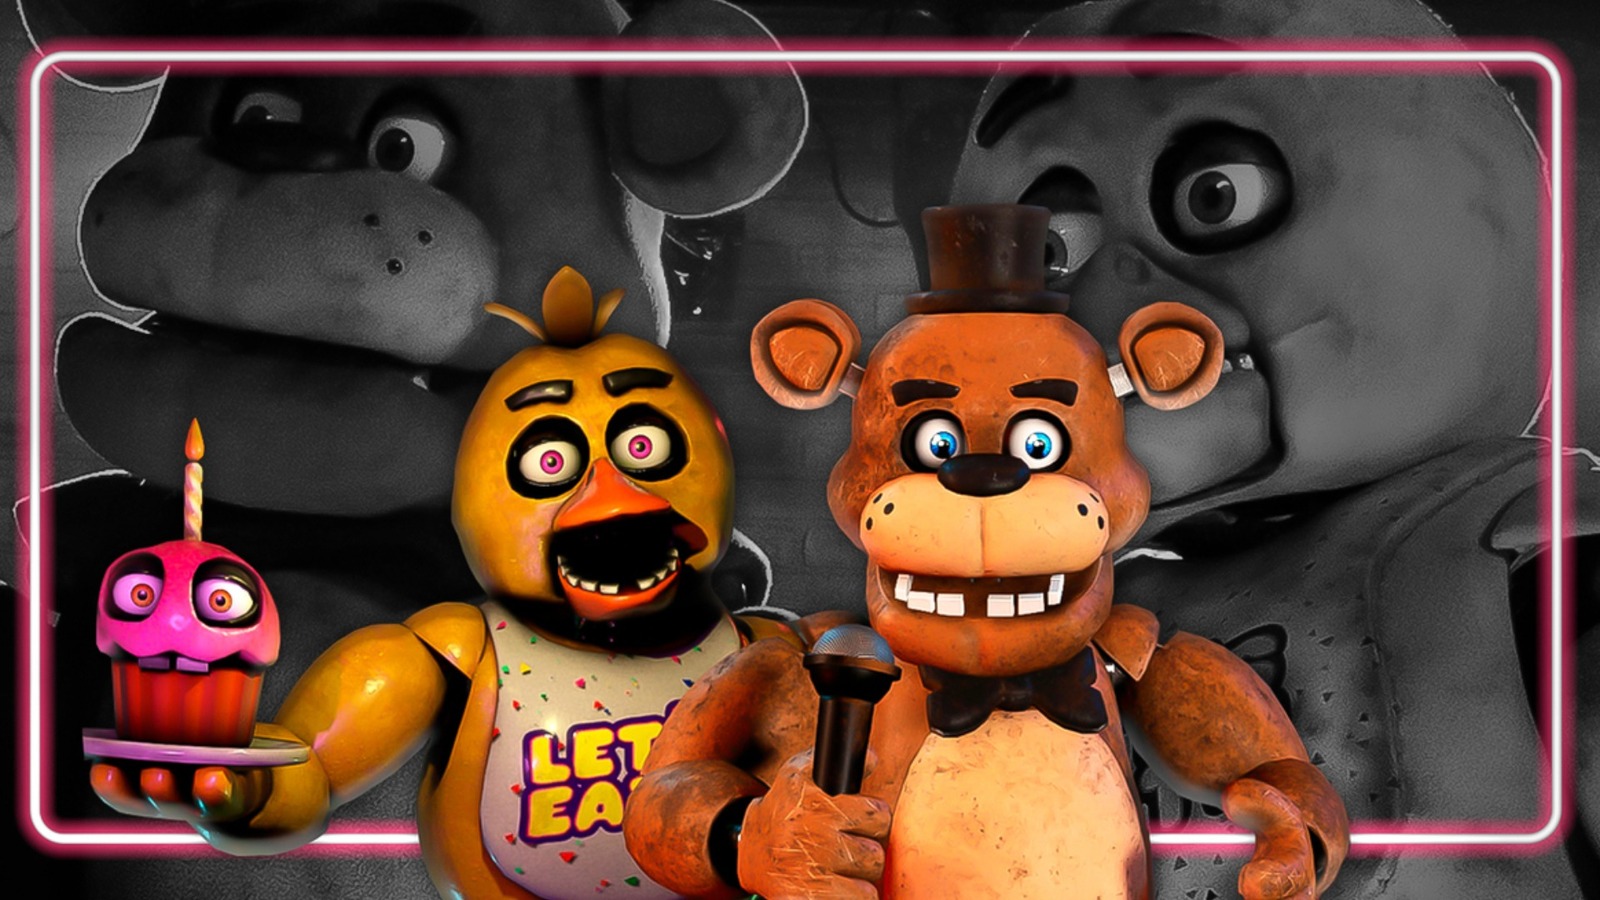 chris baskerville recommends five nights at freddys naked girls pic